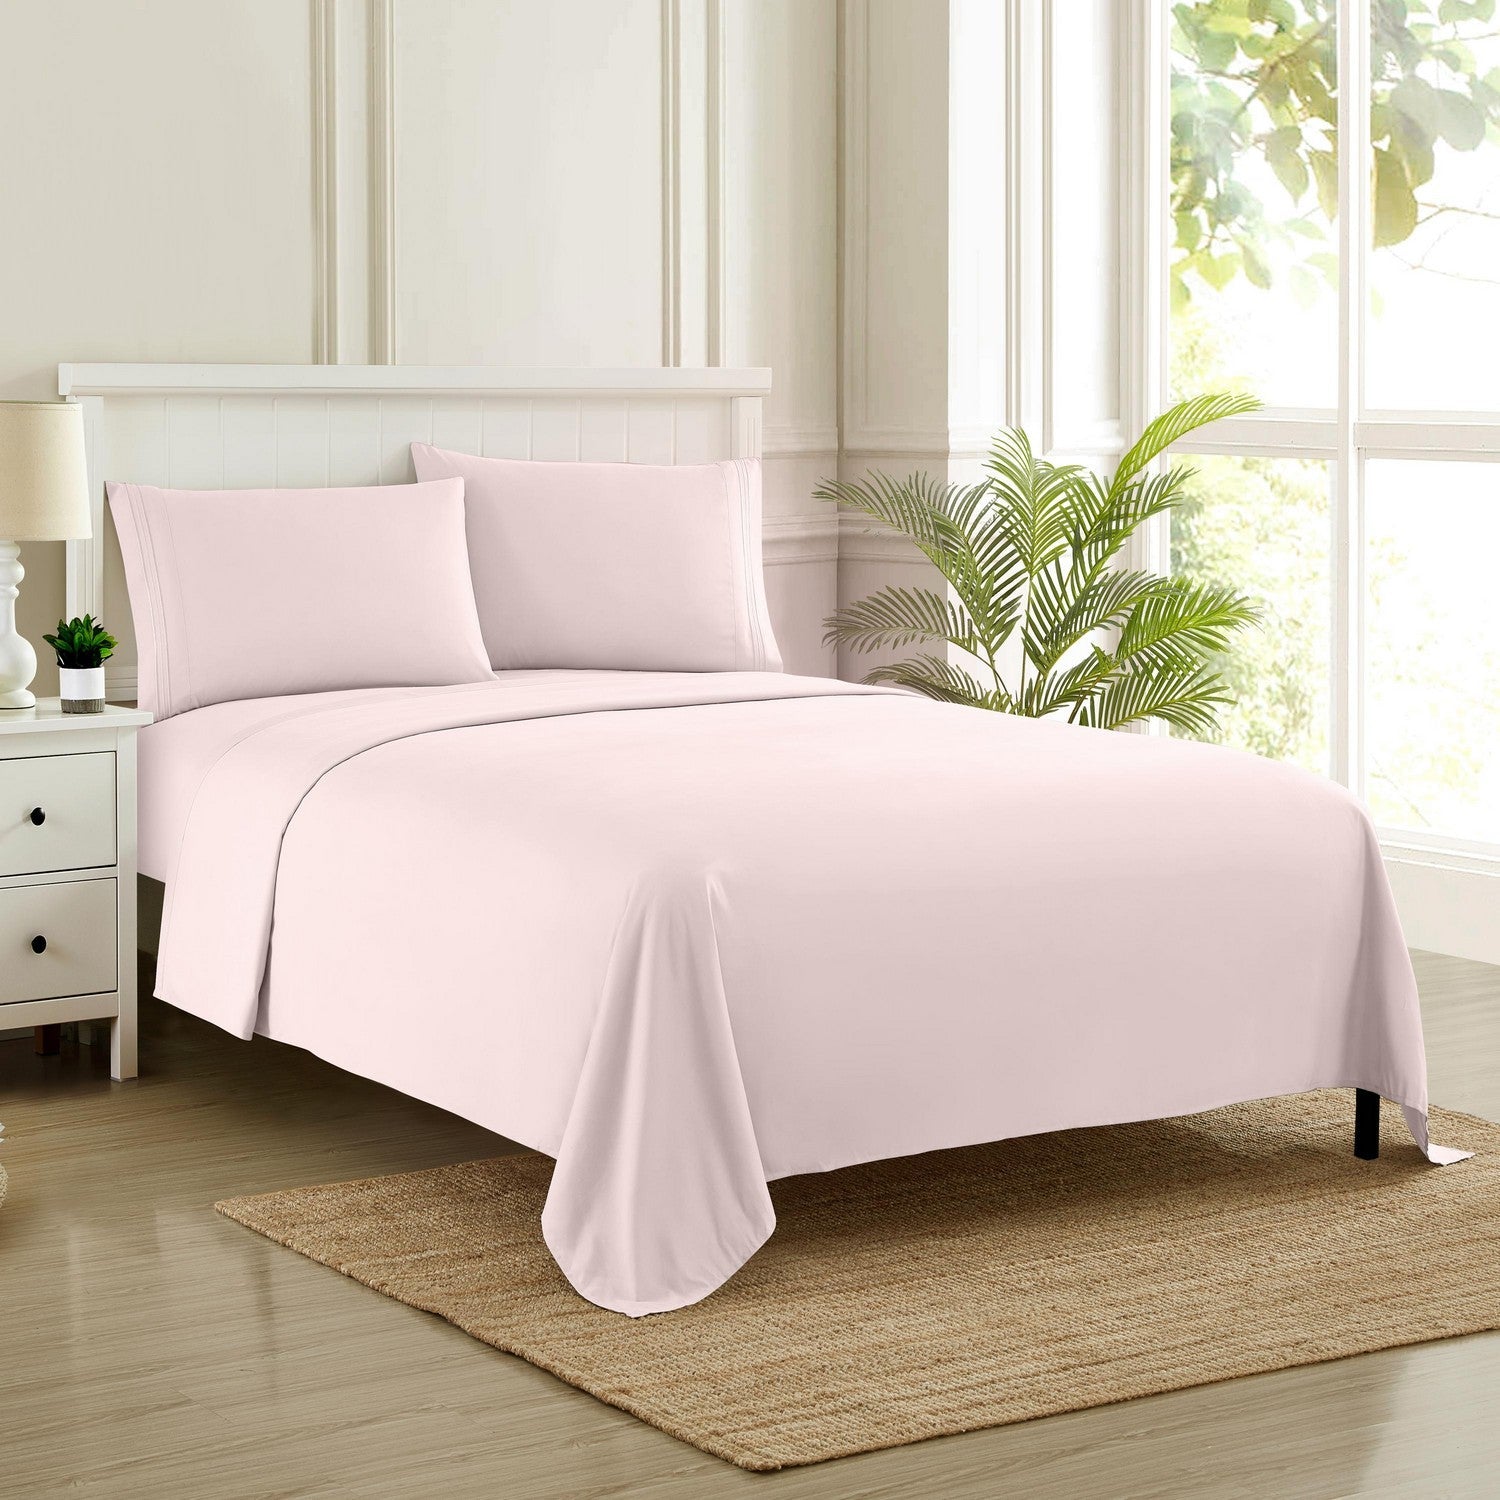 Classic 4-Piece Bed Sheet Set (Pale Pink) - Bed